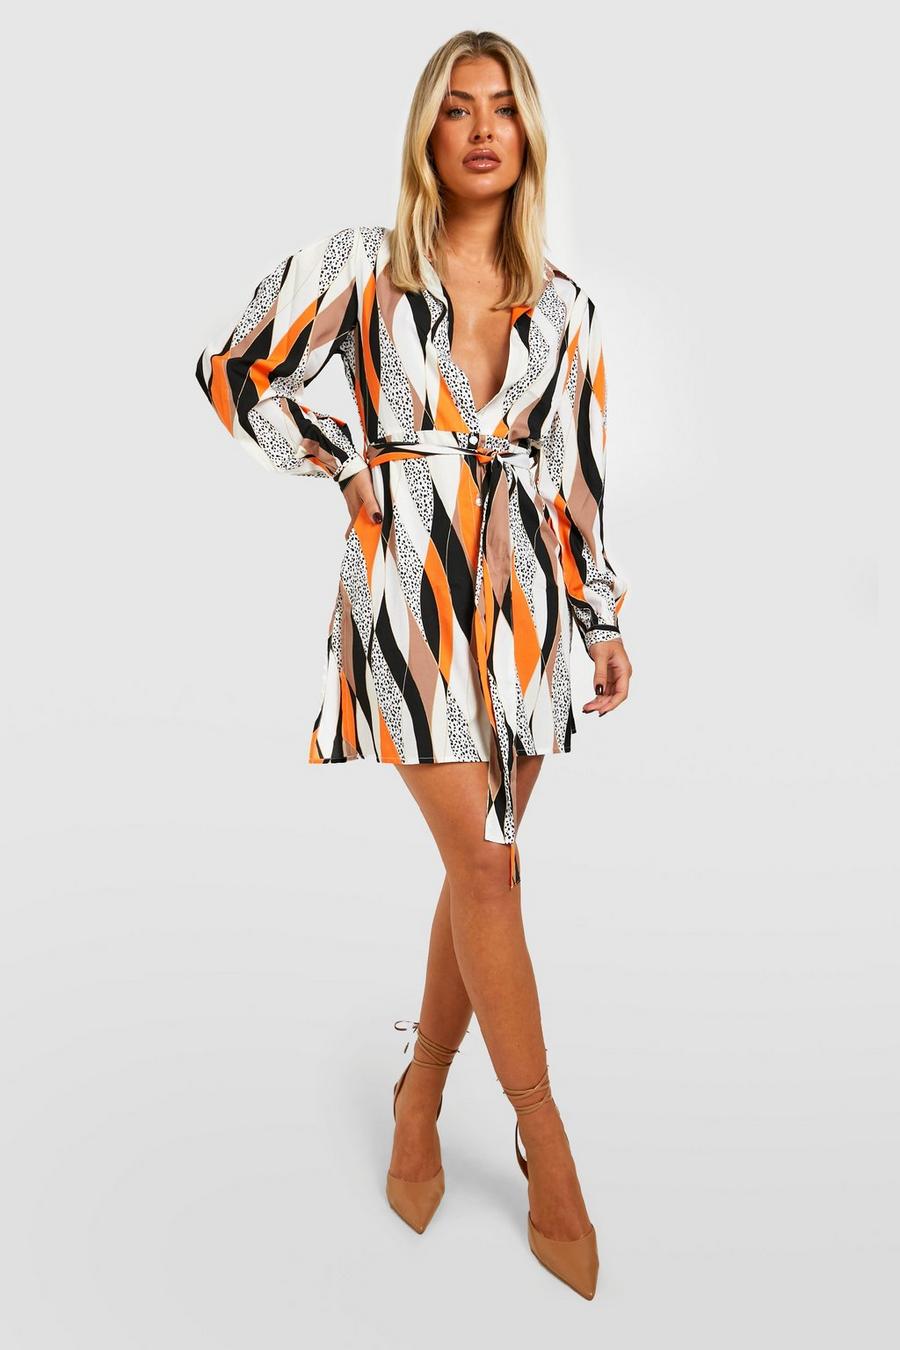 Rock Your Style: Turn Heads with an Oversized Shirt as a Dress - Click ...